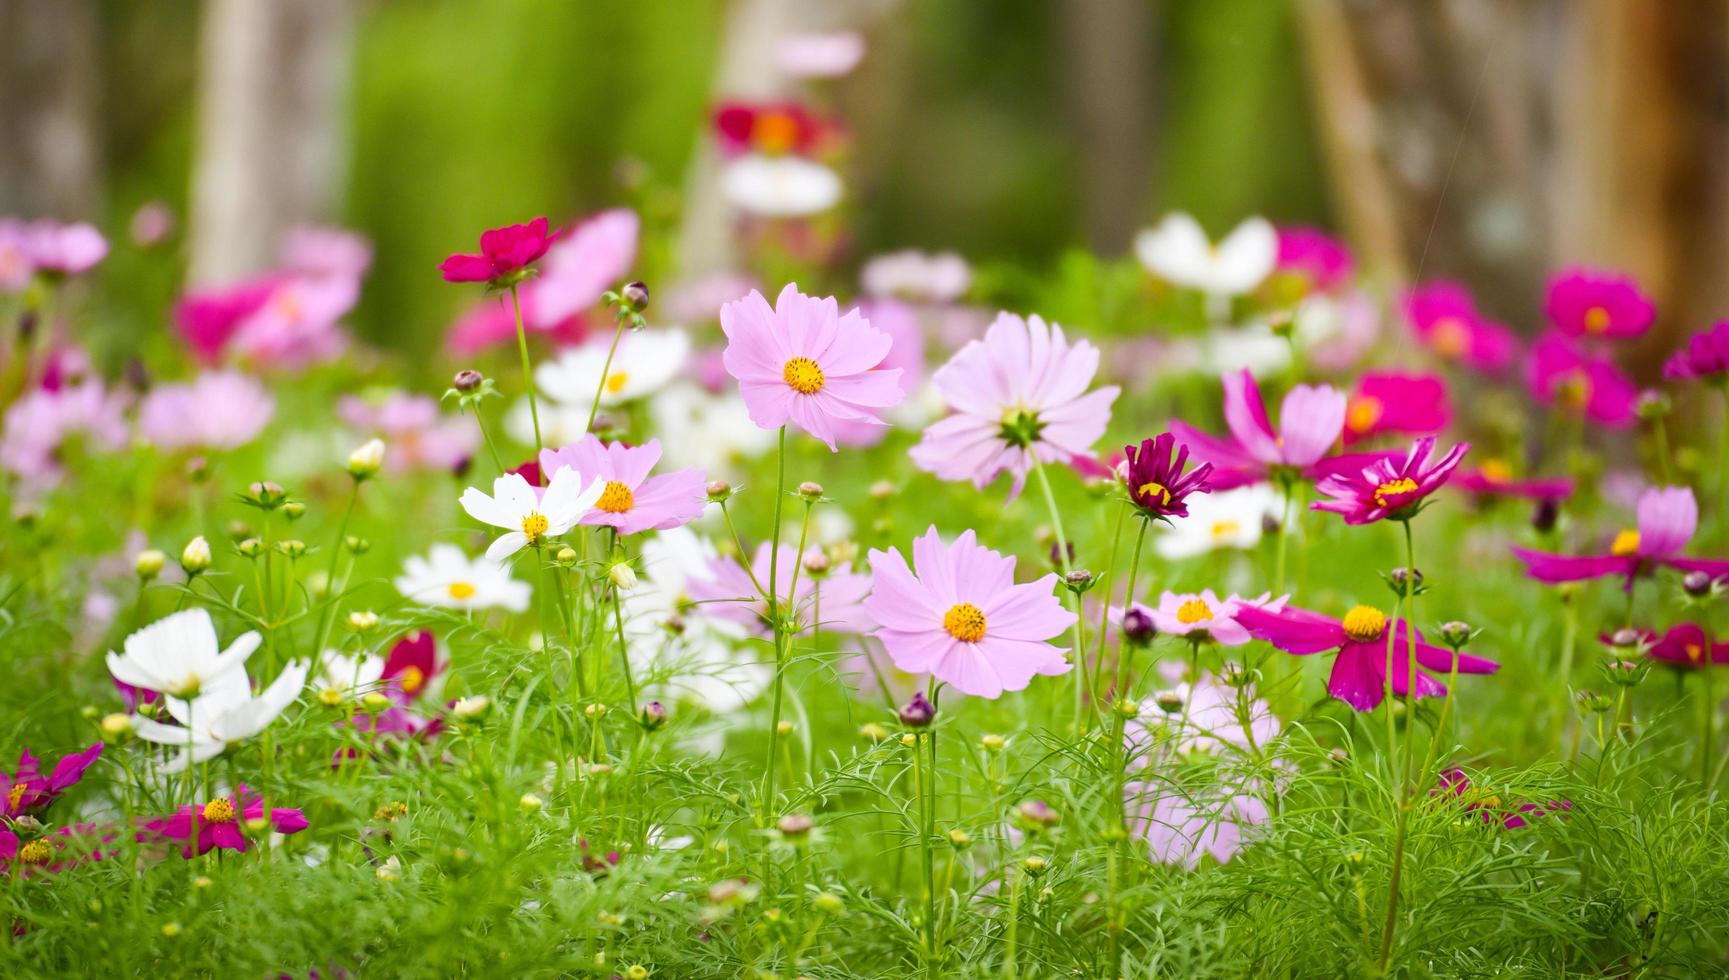 Colorful purple white and pink cosmos flower blooming in the spring garden field background photo